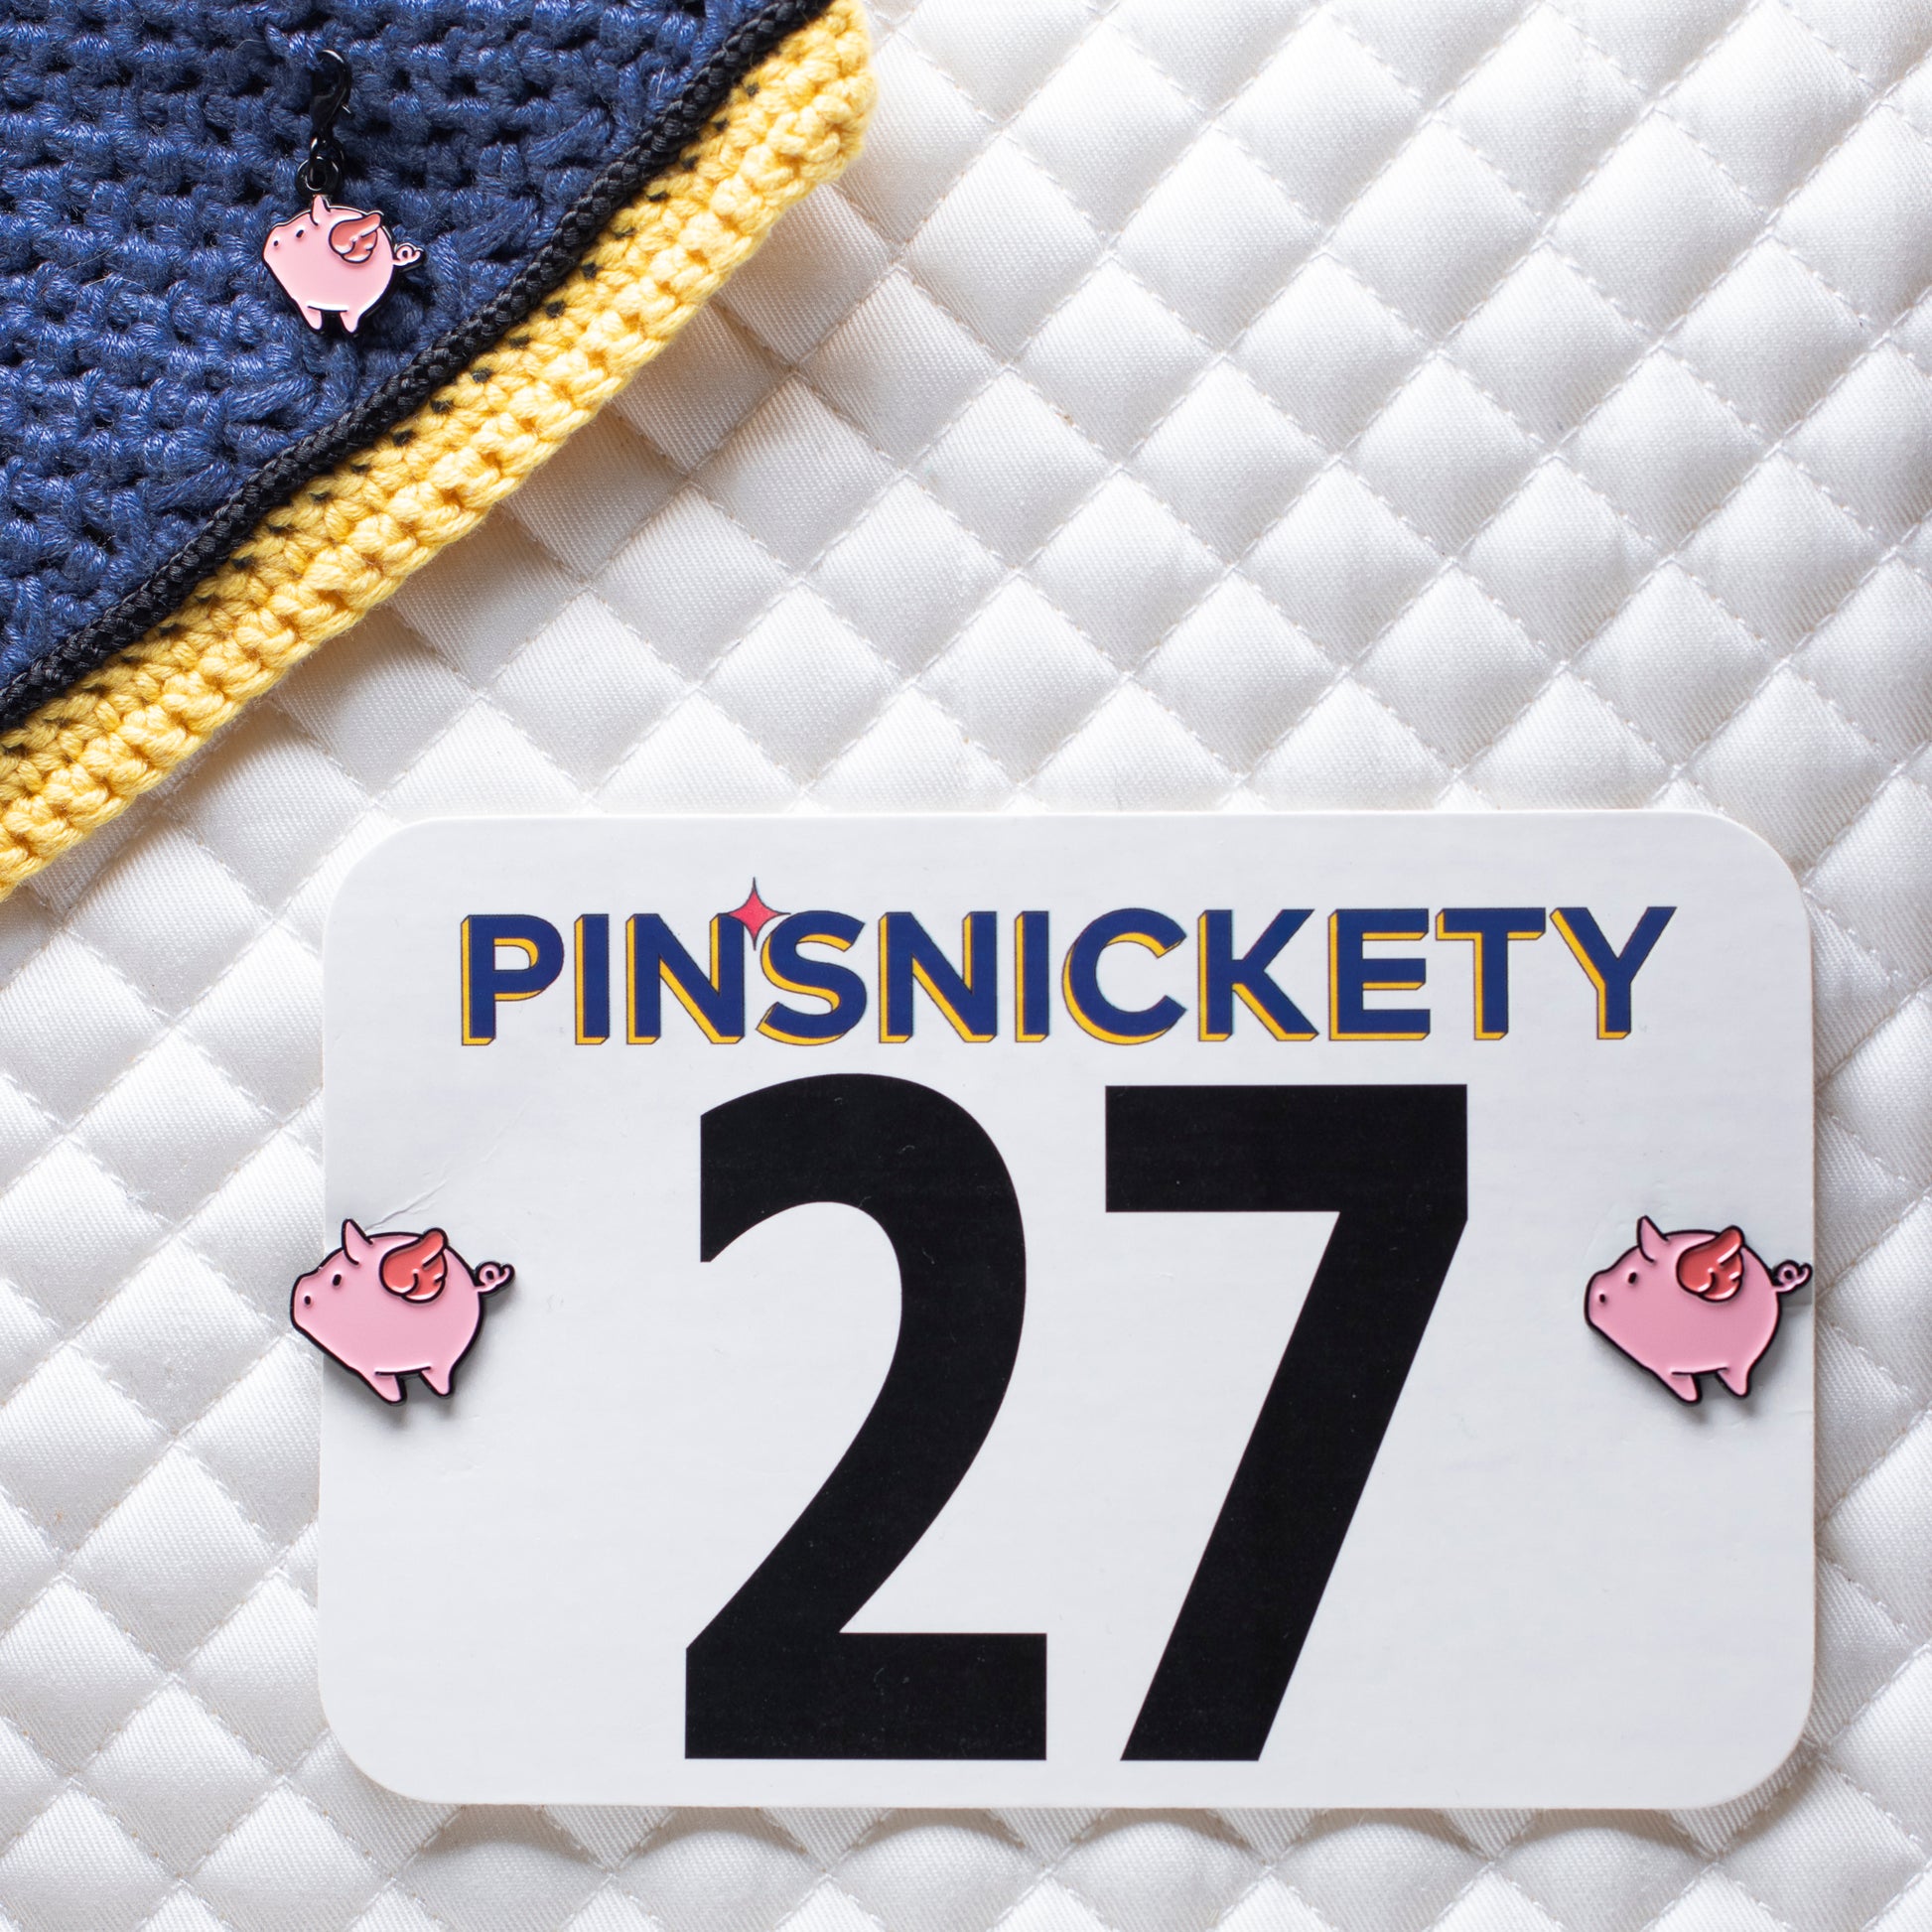 pinsnickety flying pig set, with a flying pig braid and bridle charm on a bonnet and flying pig horse show number pins on a saddle pad